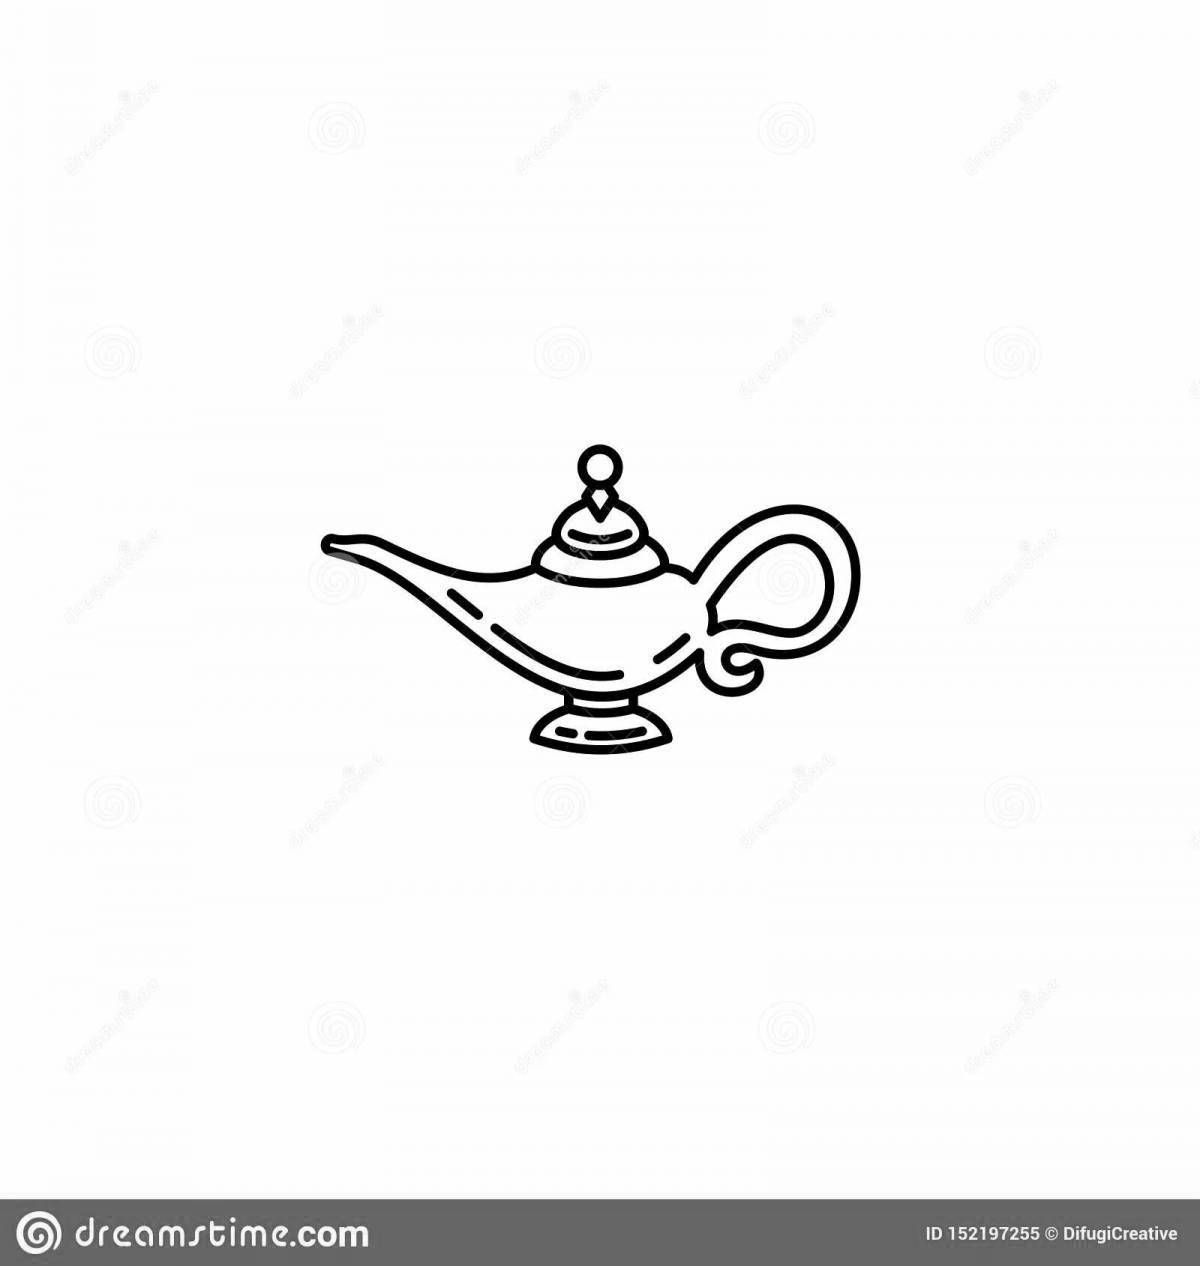 Amazing Aladdin's lamp coloring page